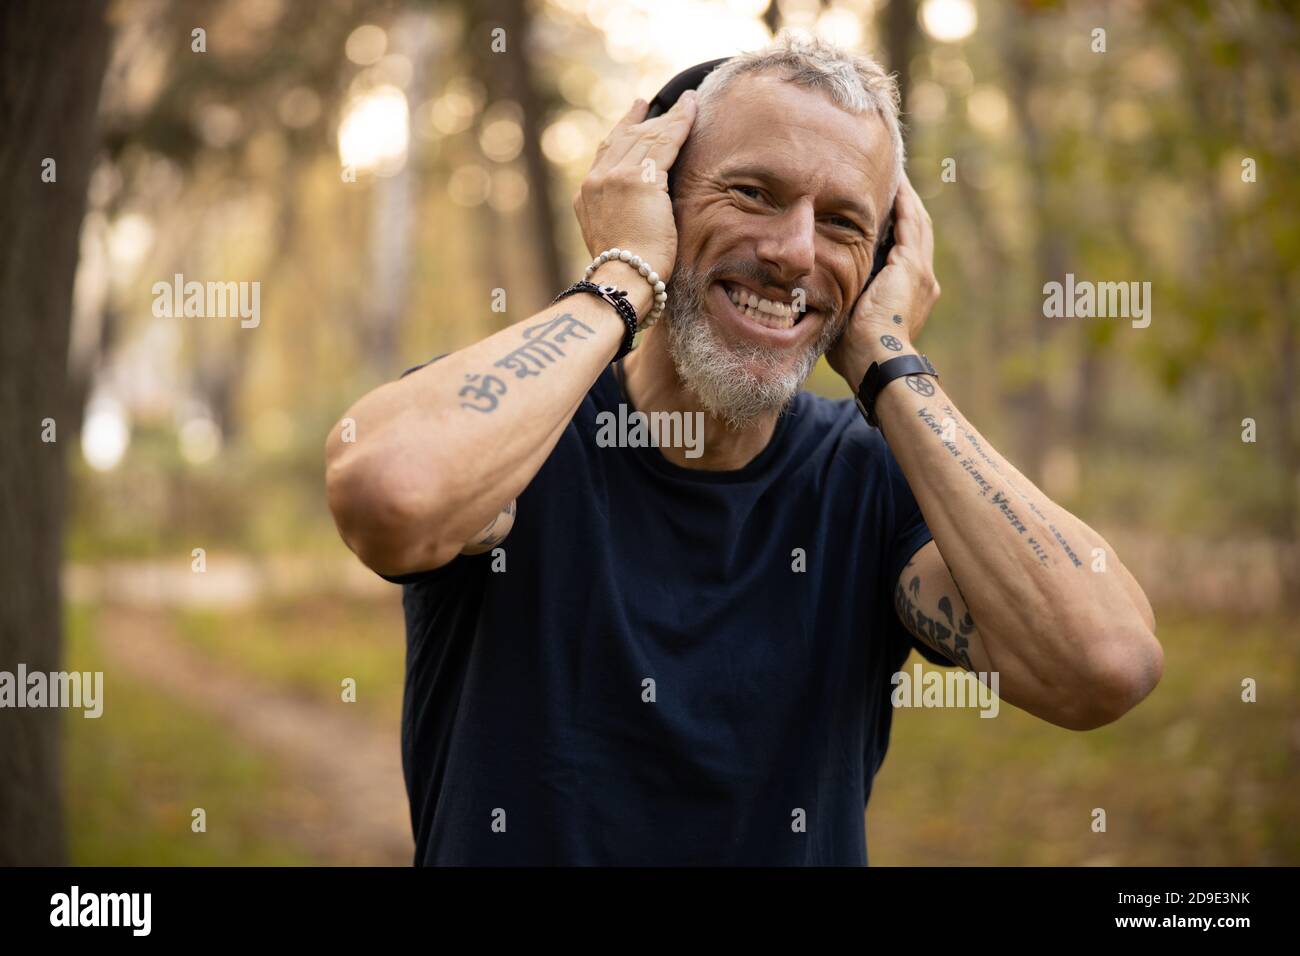 Happy active man going jogging in park Stock Photo